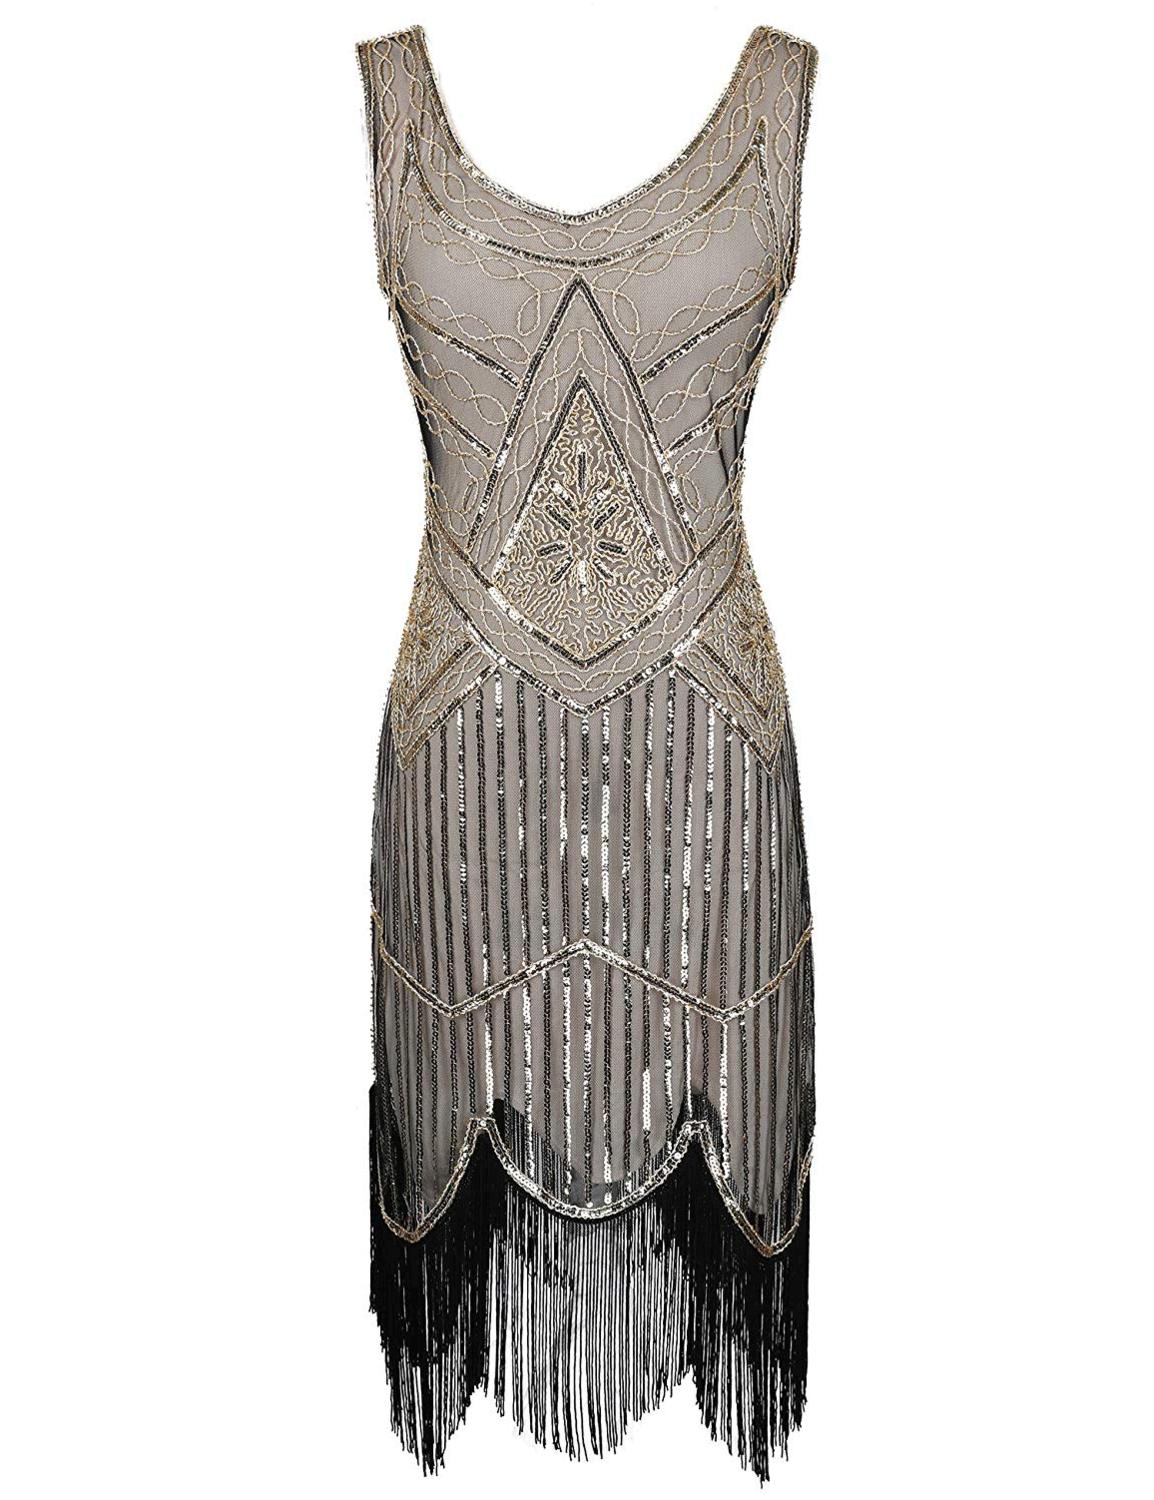 Women's Vintage 1920s Fringed Gatsby Sequin Beaded, Beige Gold, Size ...